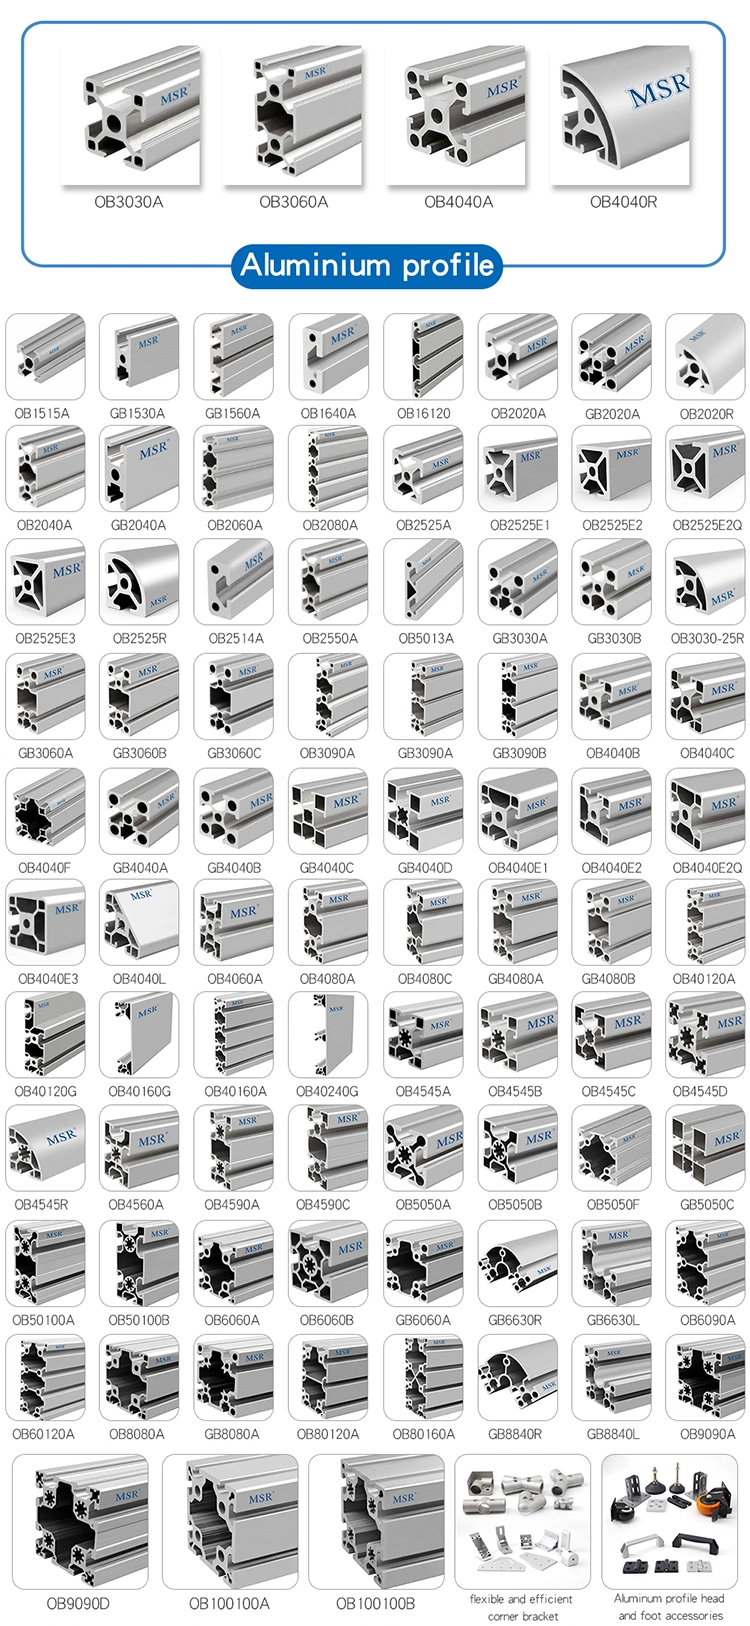 Cheap Aluminium Profiles 304 Stainless Steel Material Rotary Latch /Door Holder/Catch30A 40A 45A Door Connector